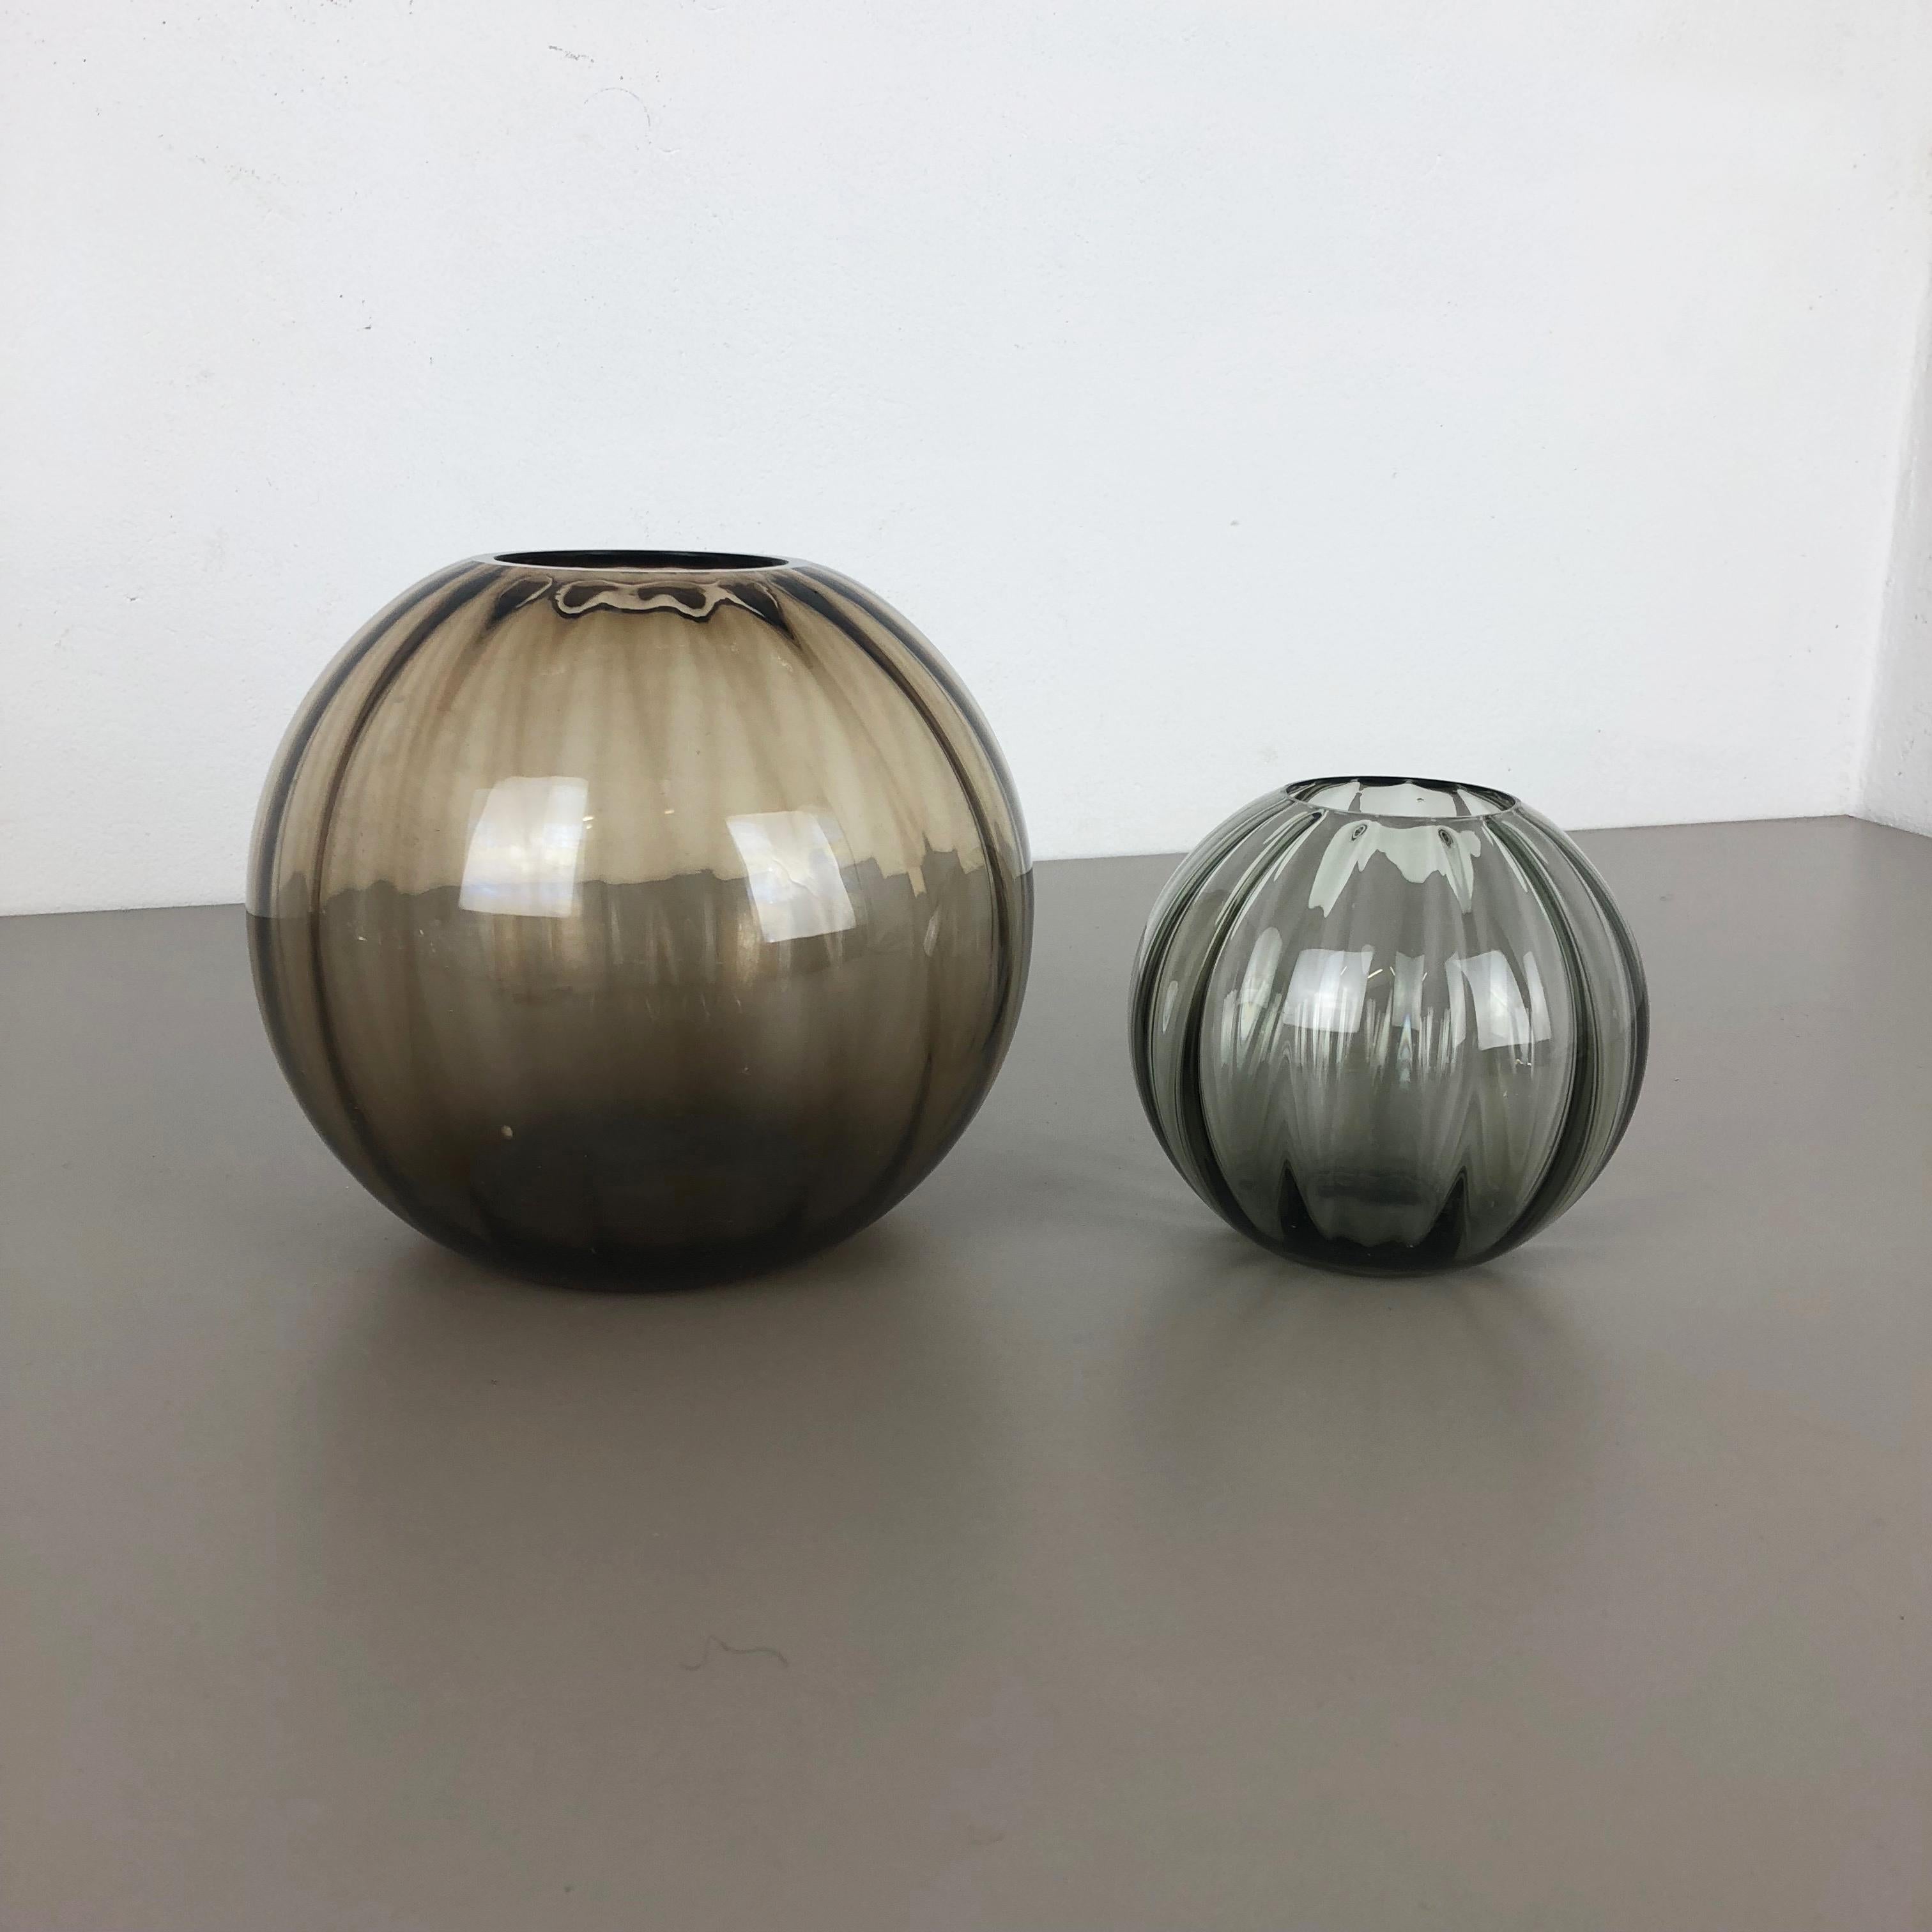 Vintage 1960s Set of 2 Ball Vases Turmaline by Wilhelm Wagenfeld for WMF Germany For Sale 5